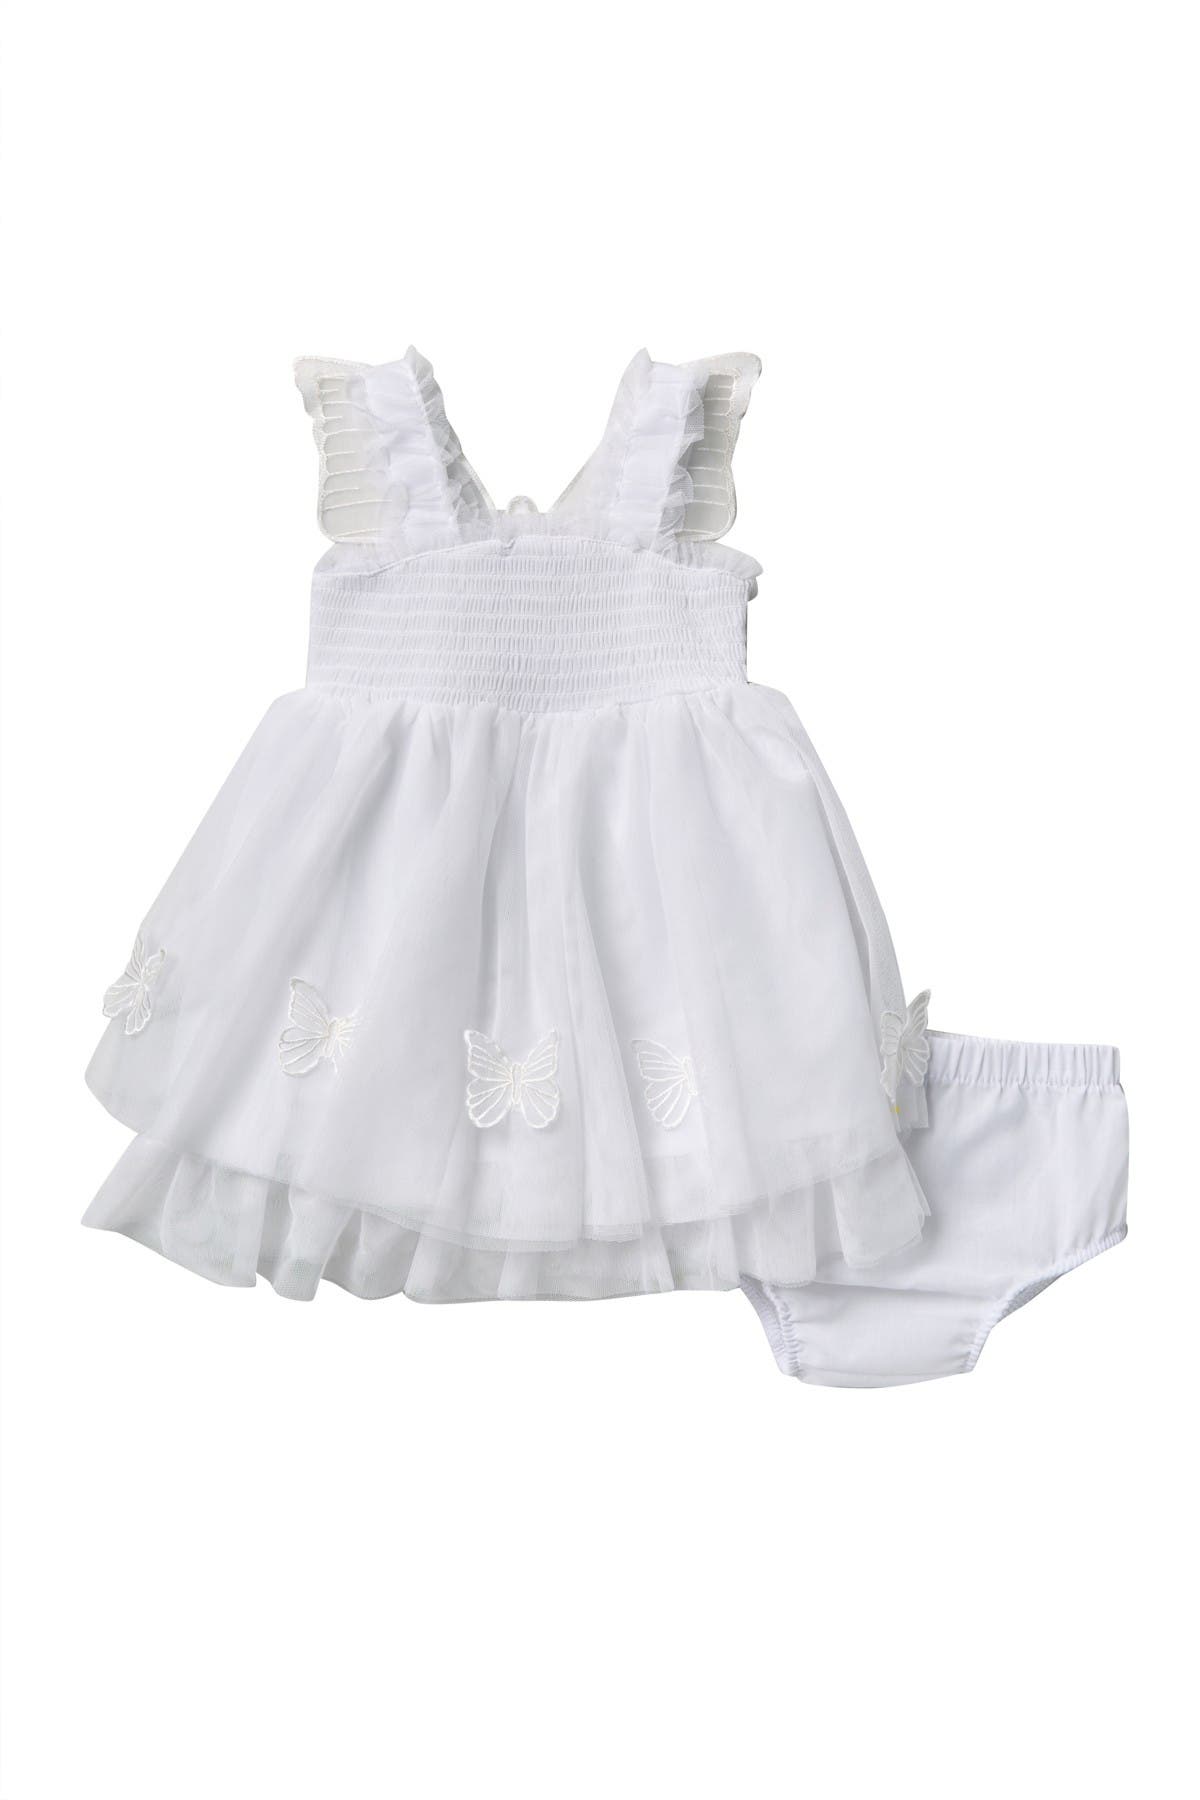 nicole miller baby clothes